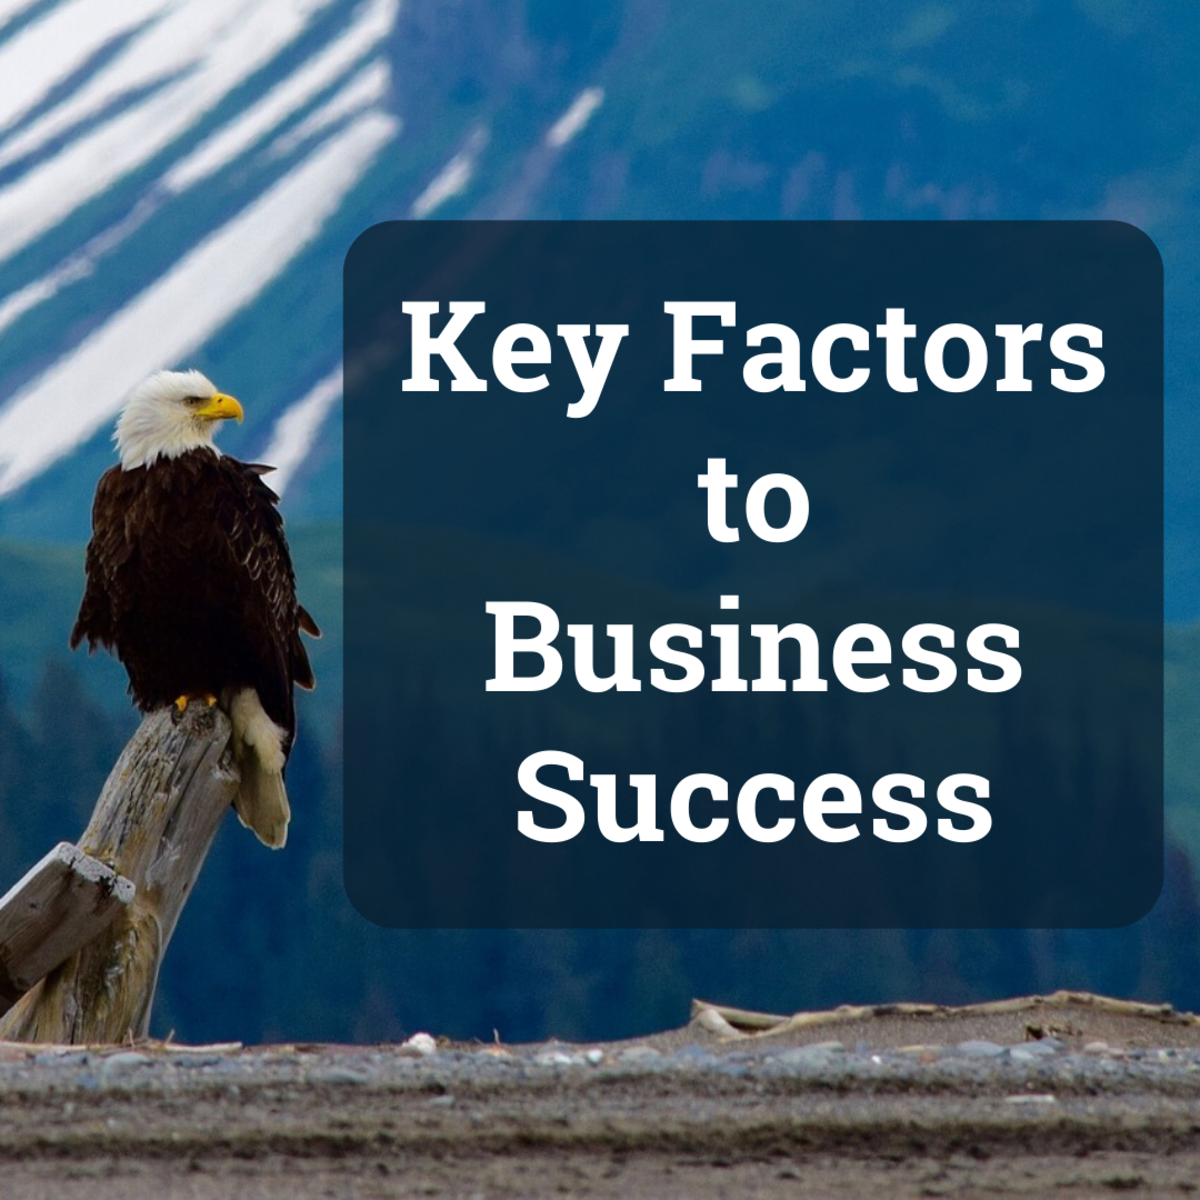 6 Important factors to consider before starting your business